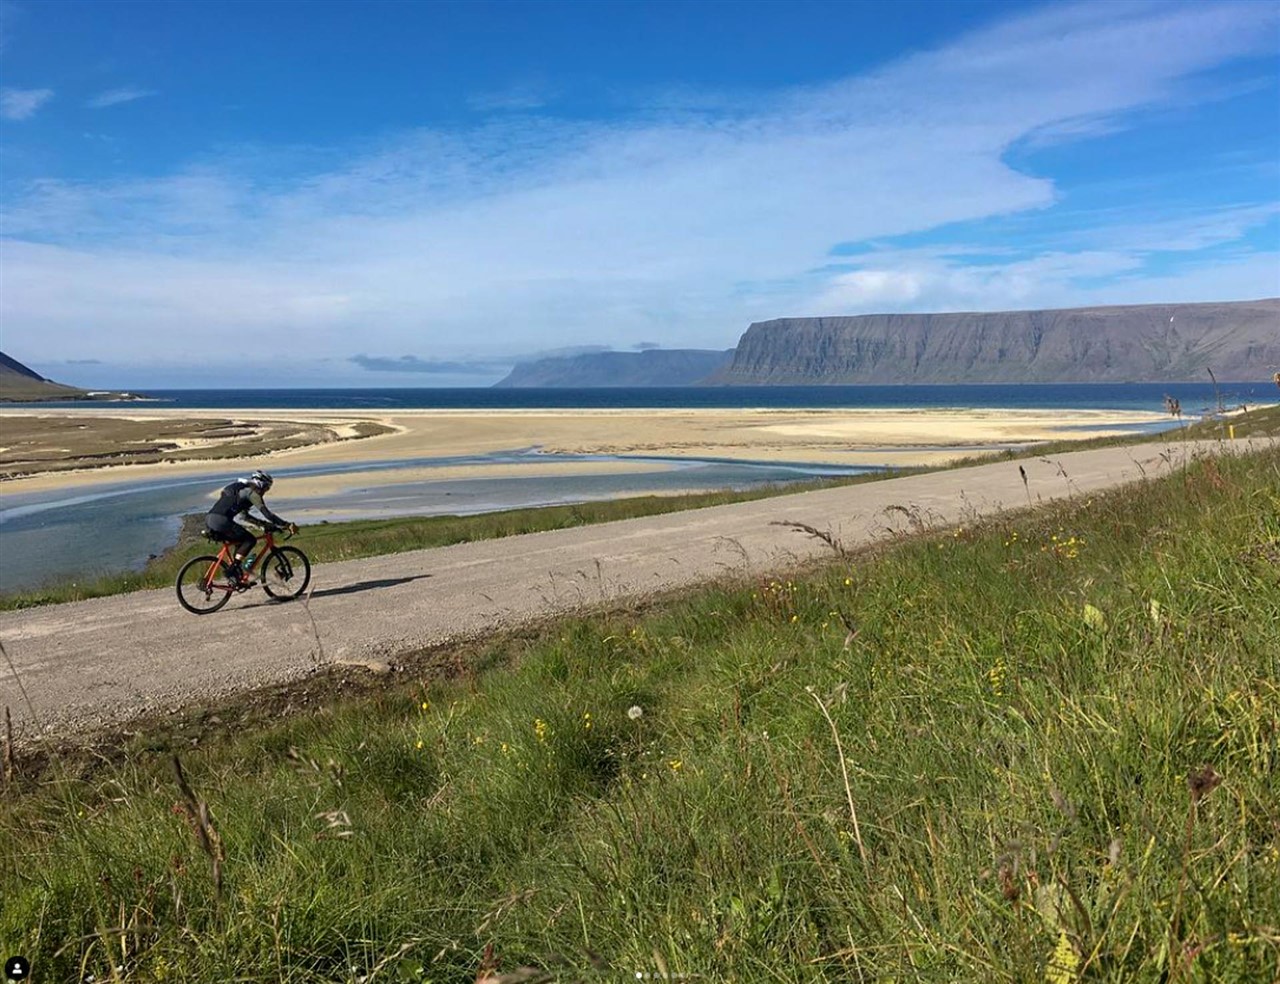 https://icebike-c0a2.kxcdn.com/wp-content/uploads/2023/02/Gravel-cycling-in-the-westfjords-of-Iceland.jpg